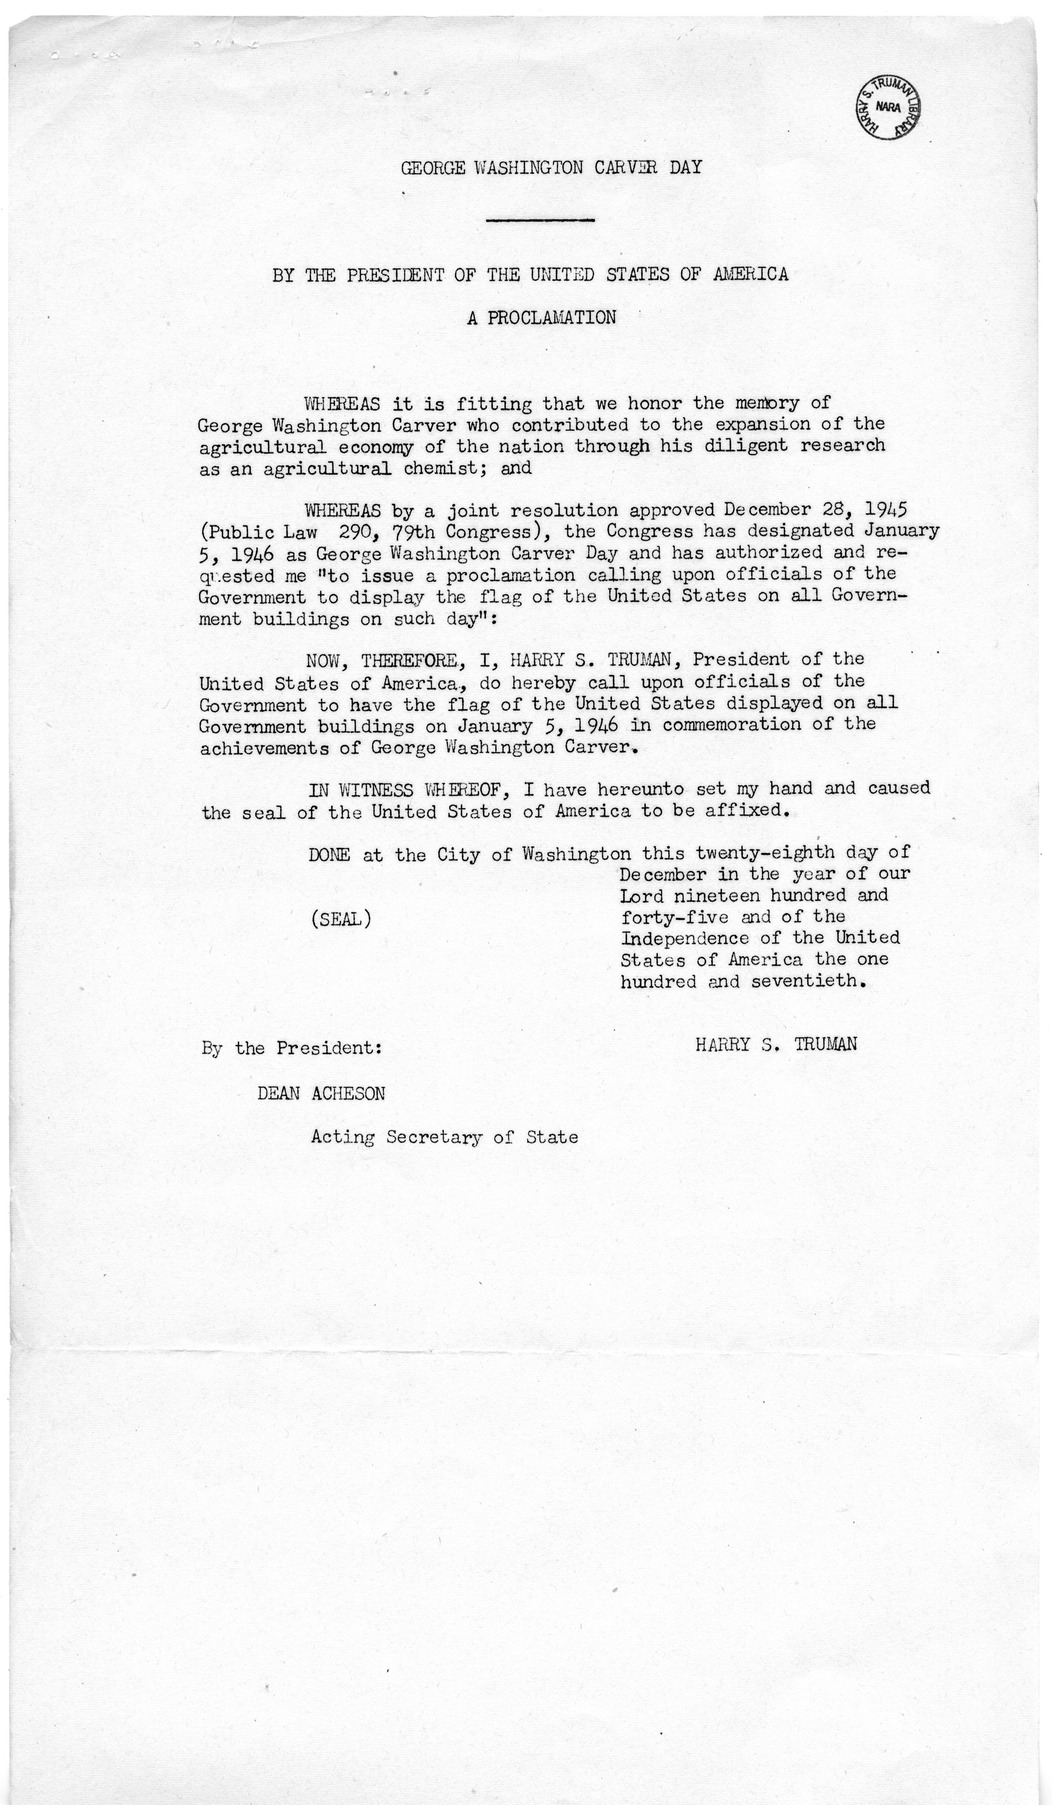 Memorandum from Harold D. Smith to M. C. Latta, H.J. Res. 111, Designating January 5, 1946 as George Washington Carver Day, with Attachments